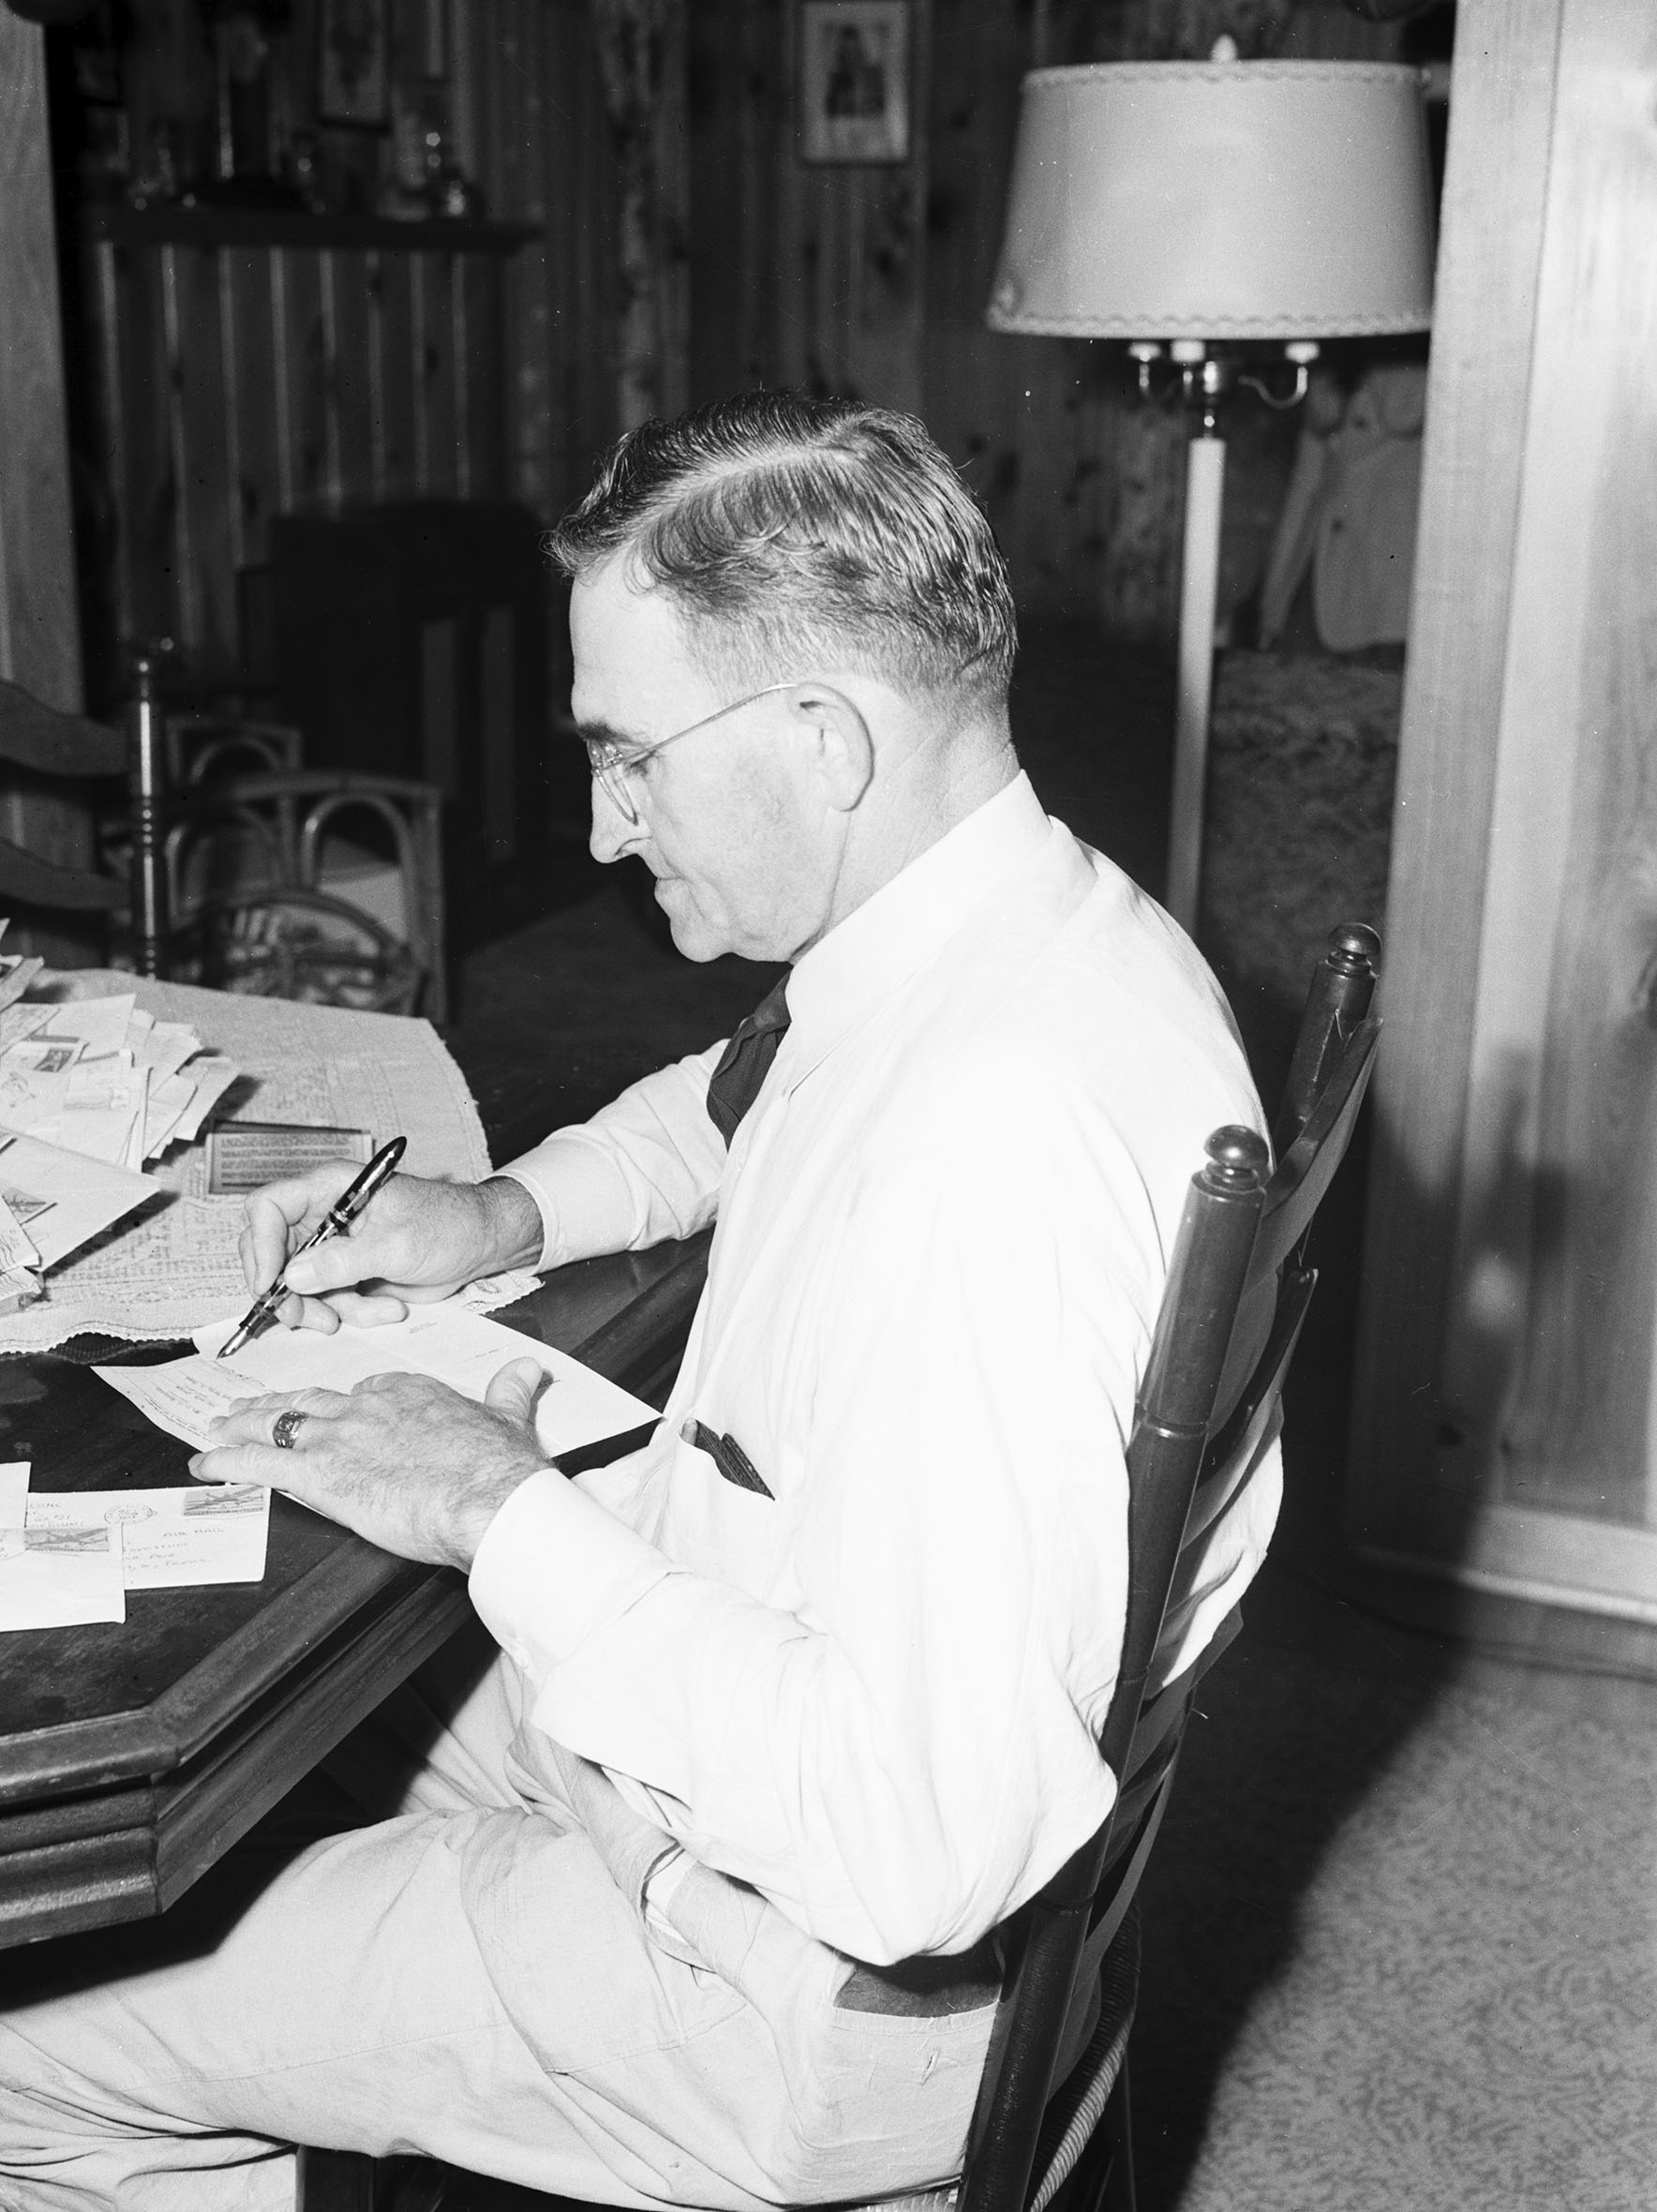 J. J. Boydstun writing letters at his table with a fountain pen. He is wearing a dress shirt, tie, and trousers, and has glasses.